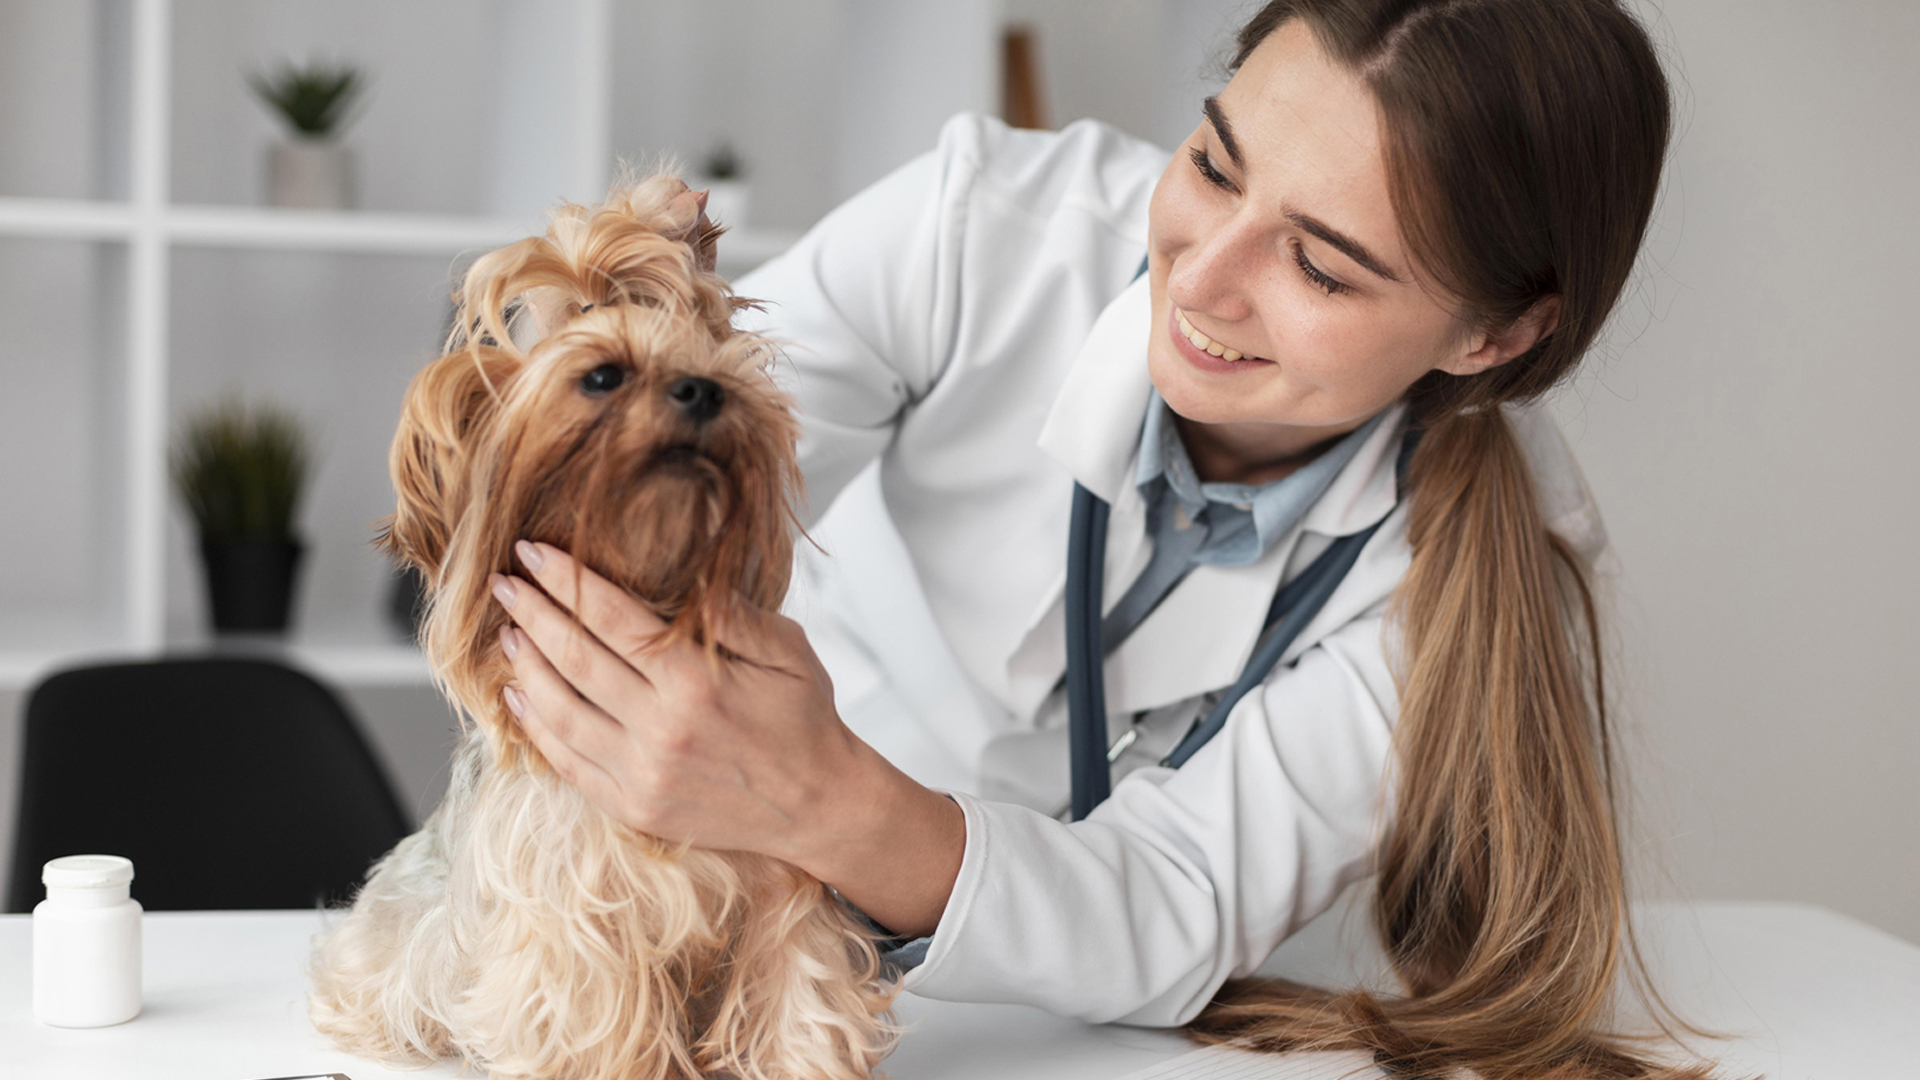 a person in a white coat petting a dog